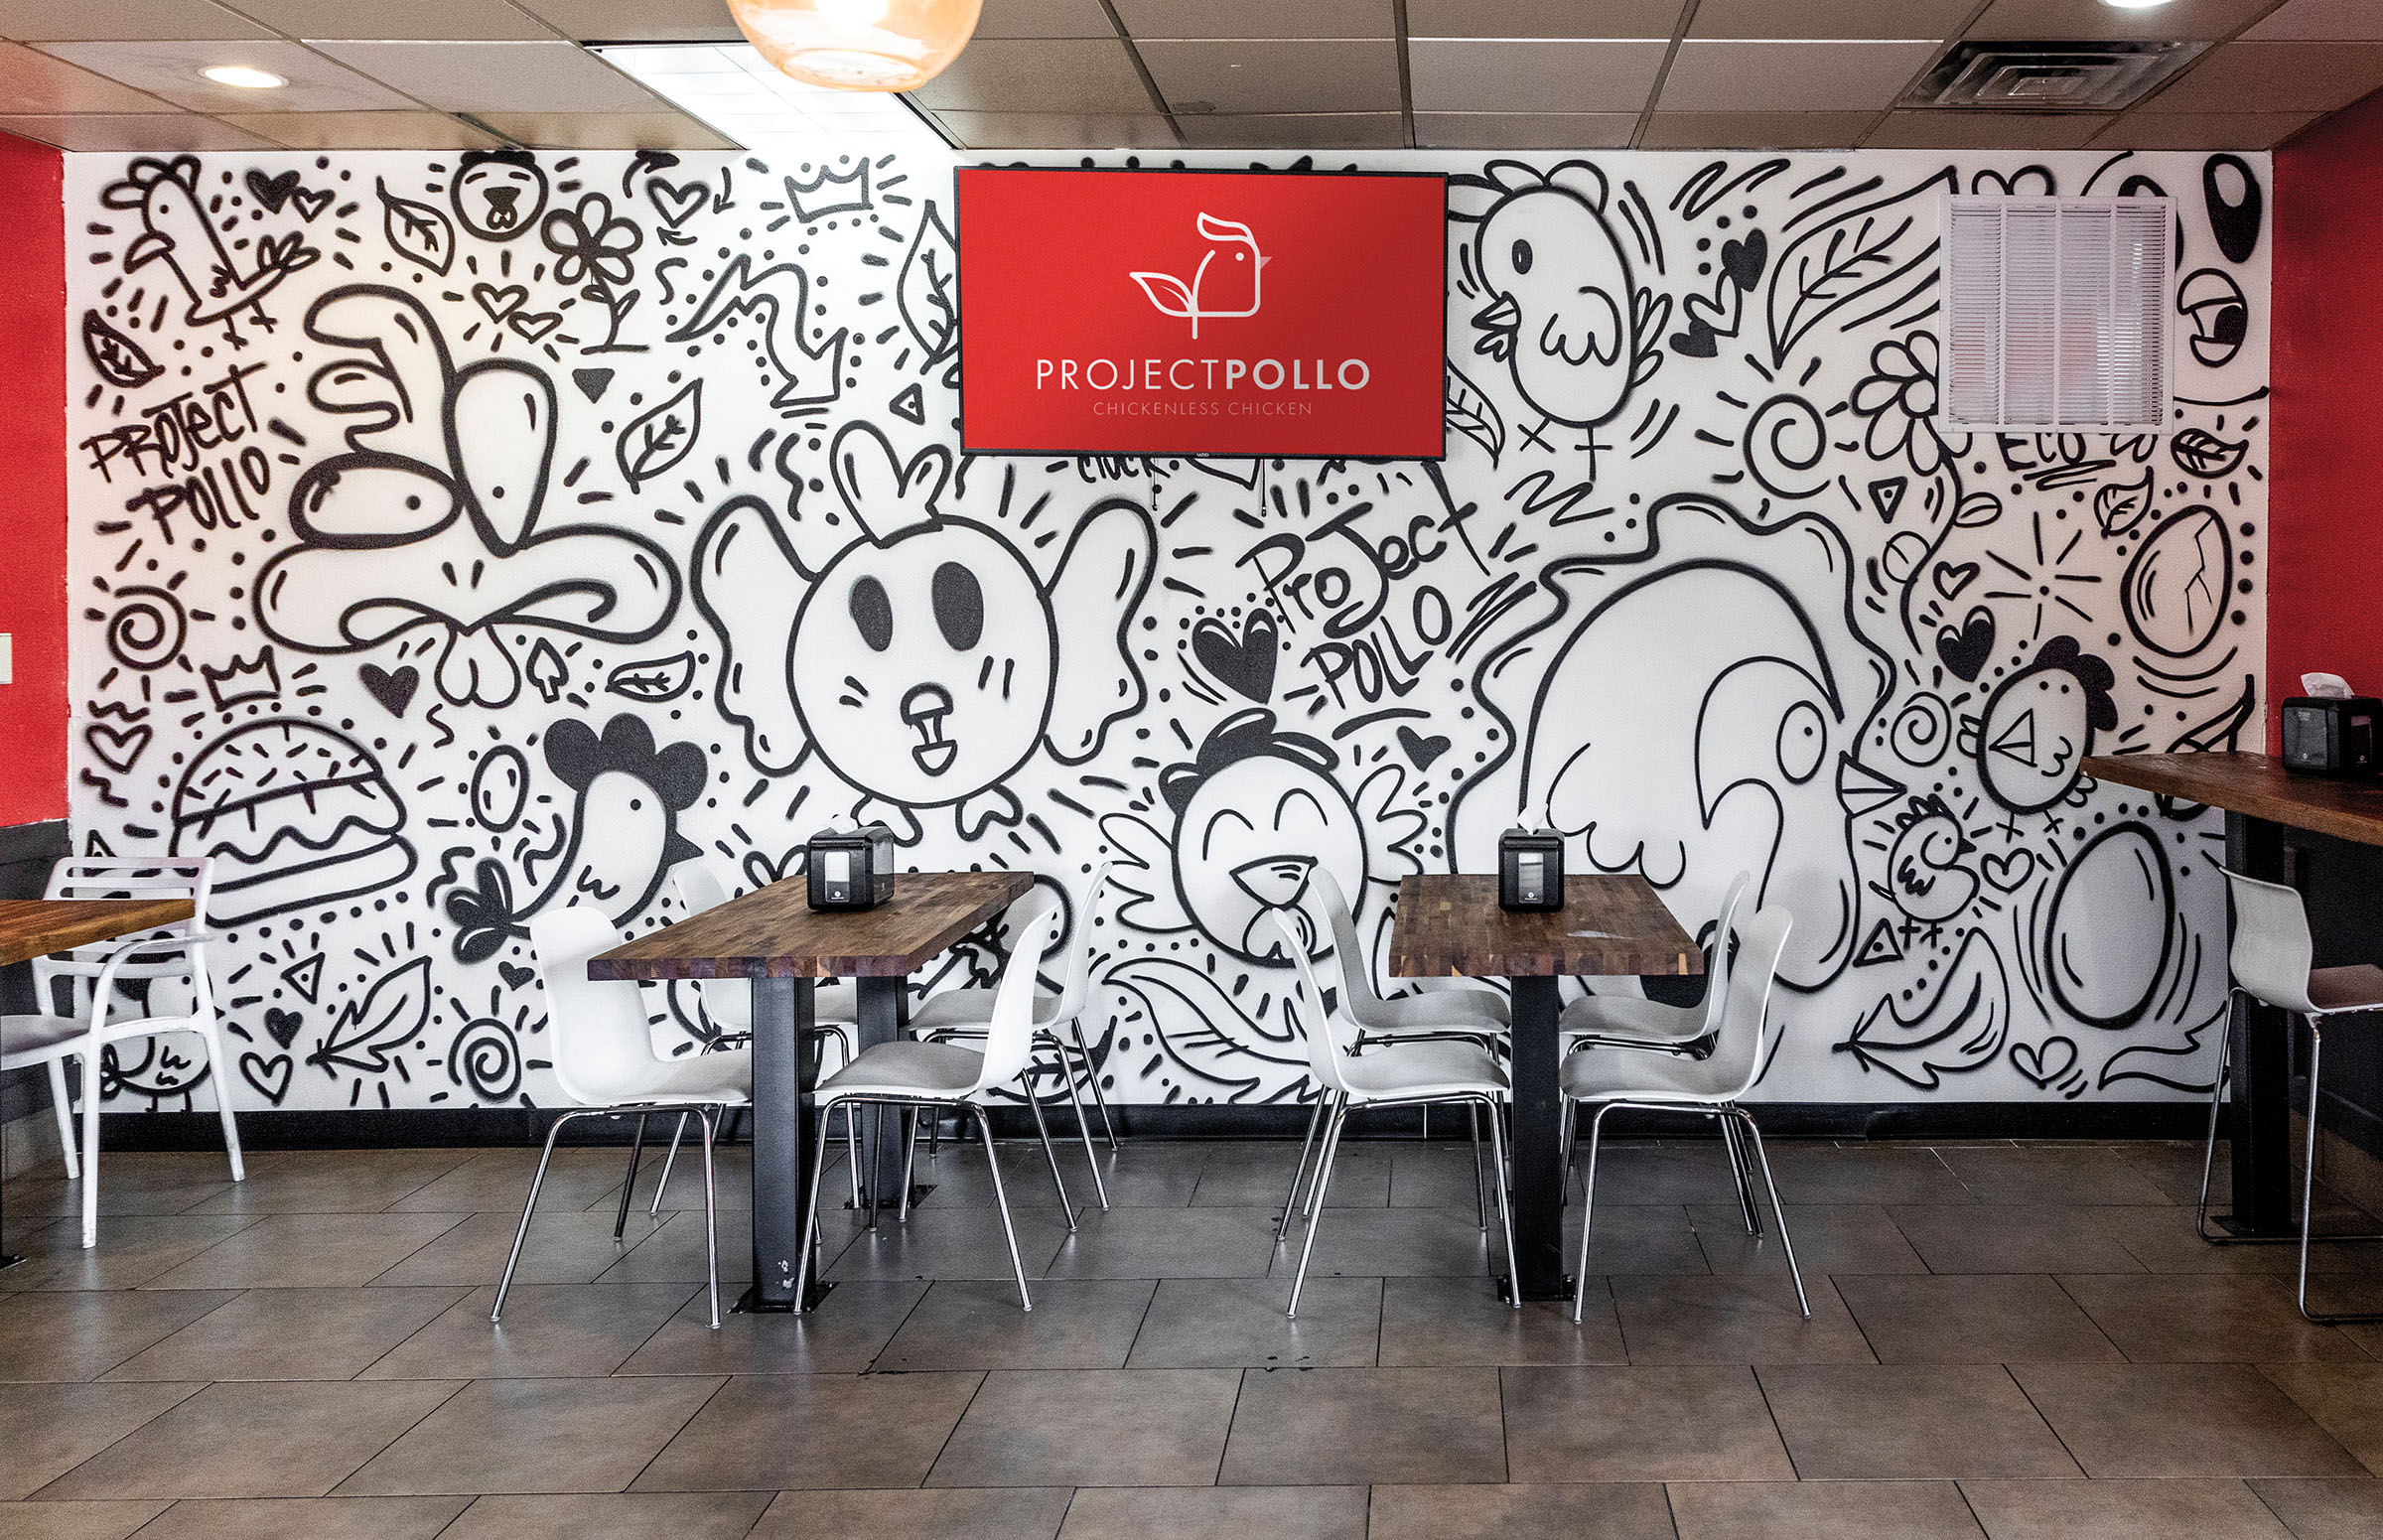 A zany mural in black and white adorns the wall of a building behind a bright red sign reading Project Pollo. Wooden tables and metal chairs dot the foreground.